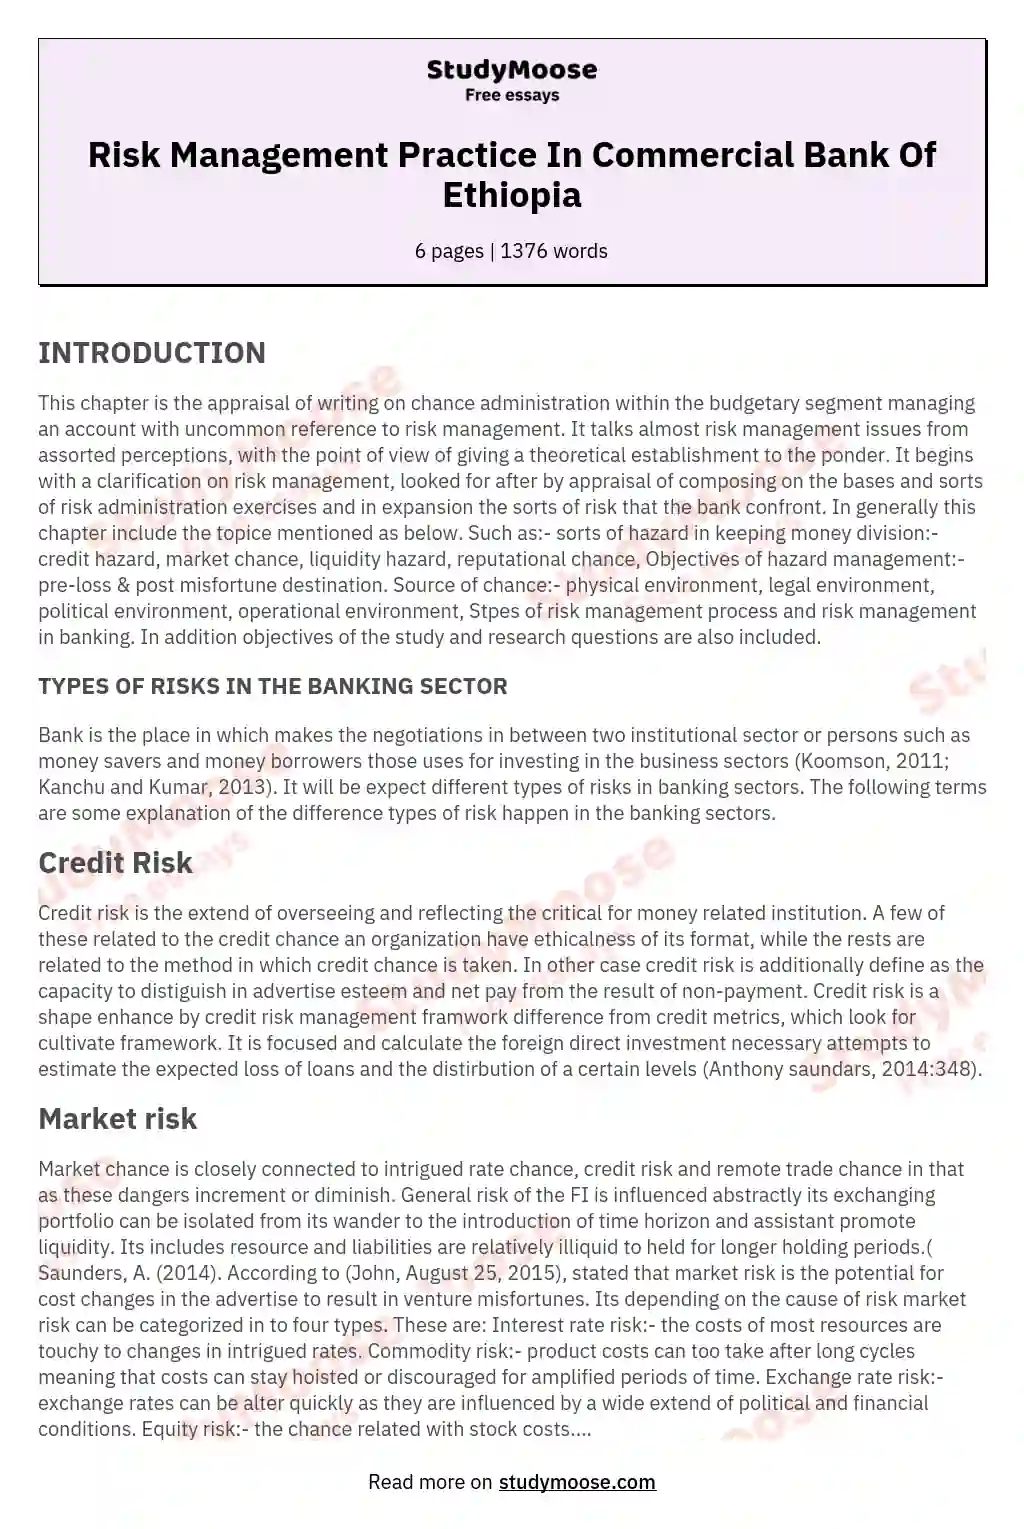 Risk Management Practice In Commercial Bank Of Ethiopia essay